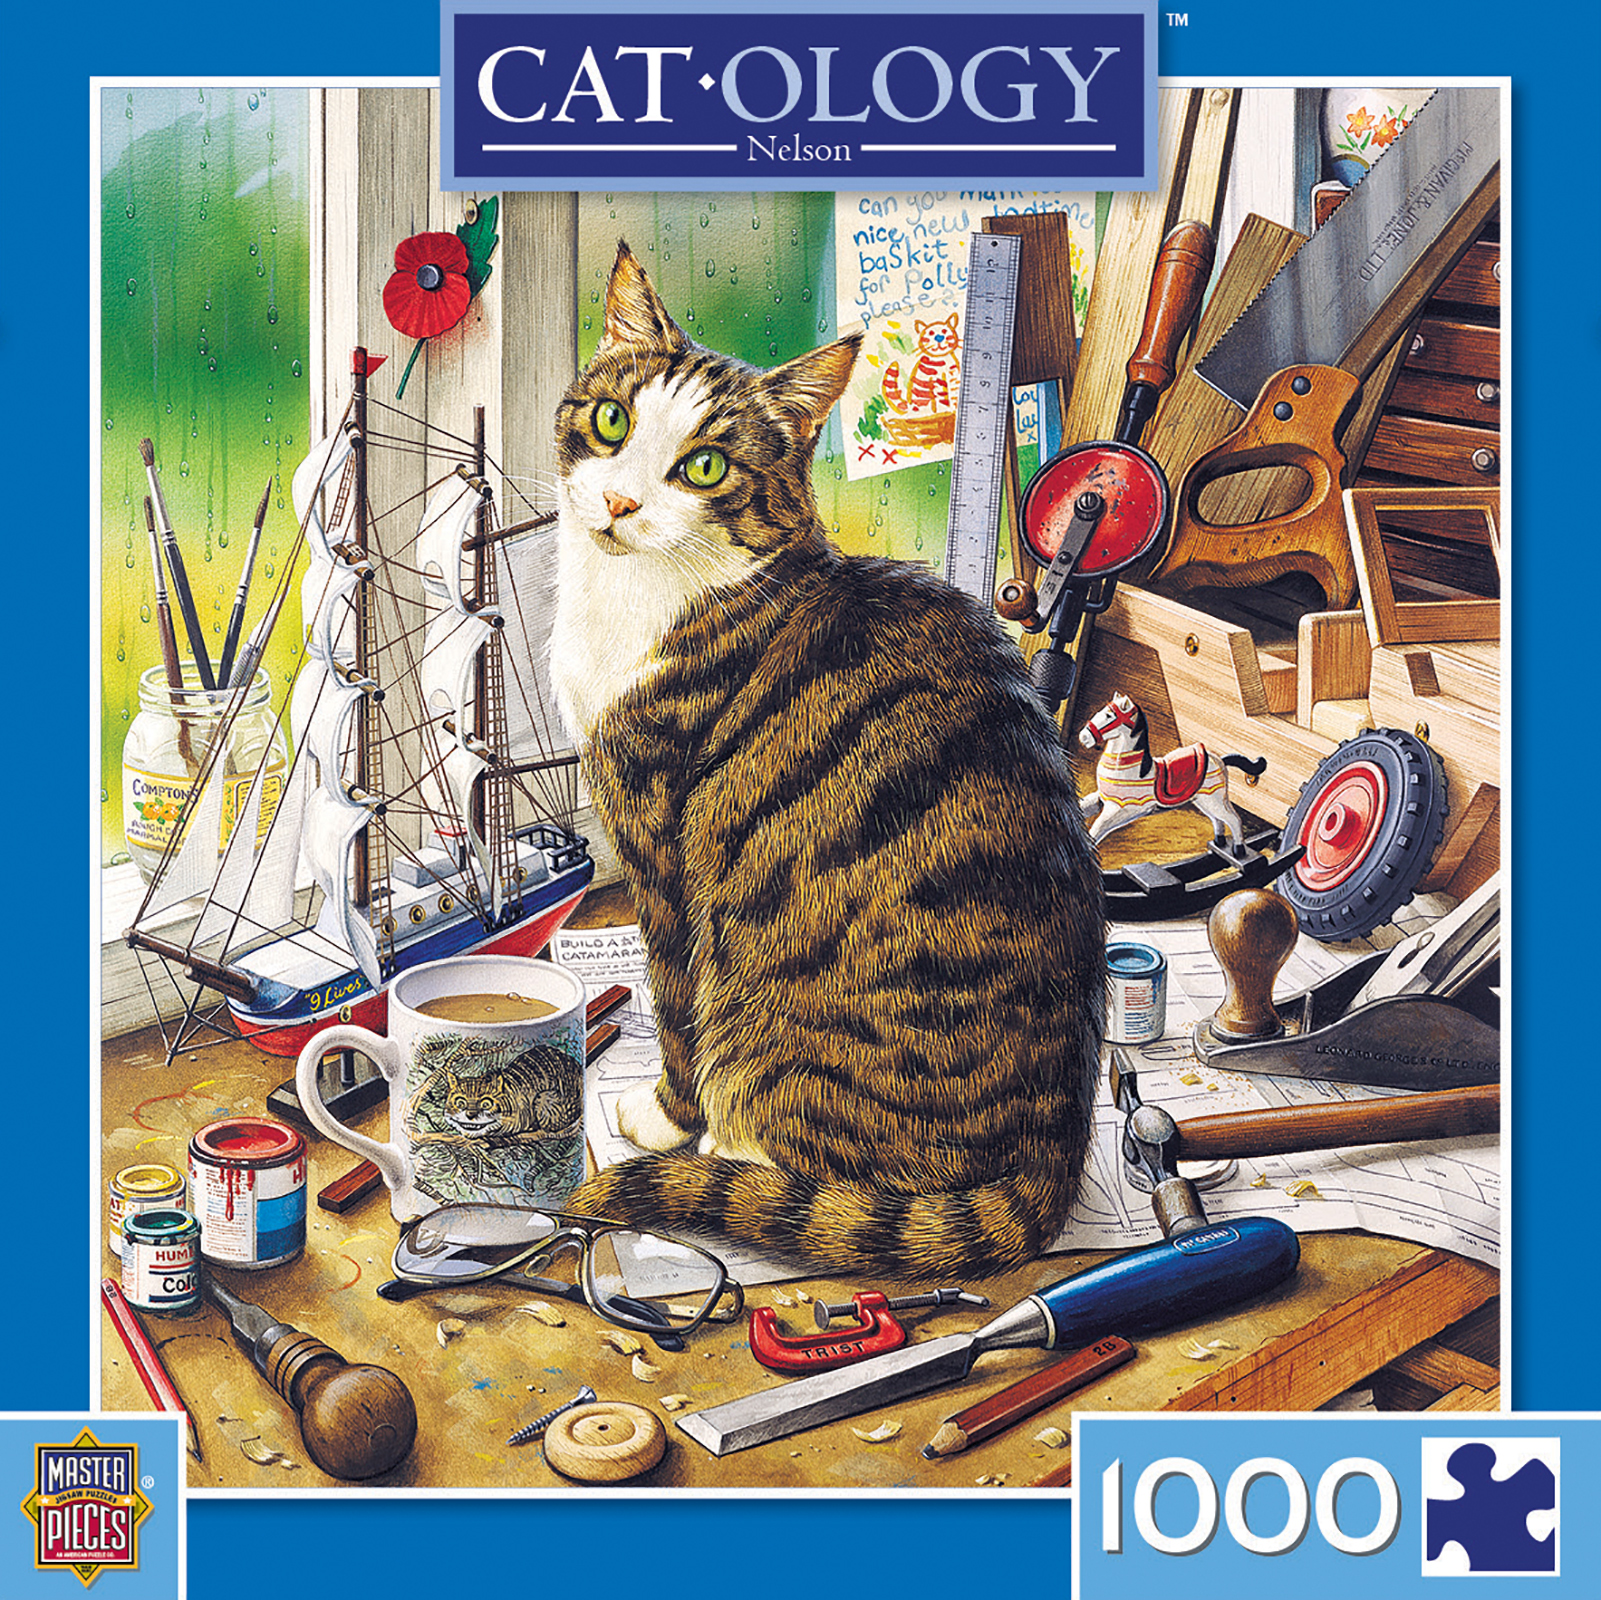 Savannah 1000 Piece Jigsaw Puzzle MasterPieces Catology Puzzles Collection